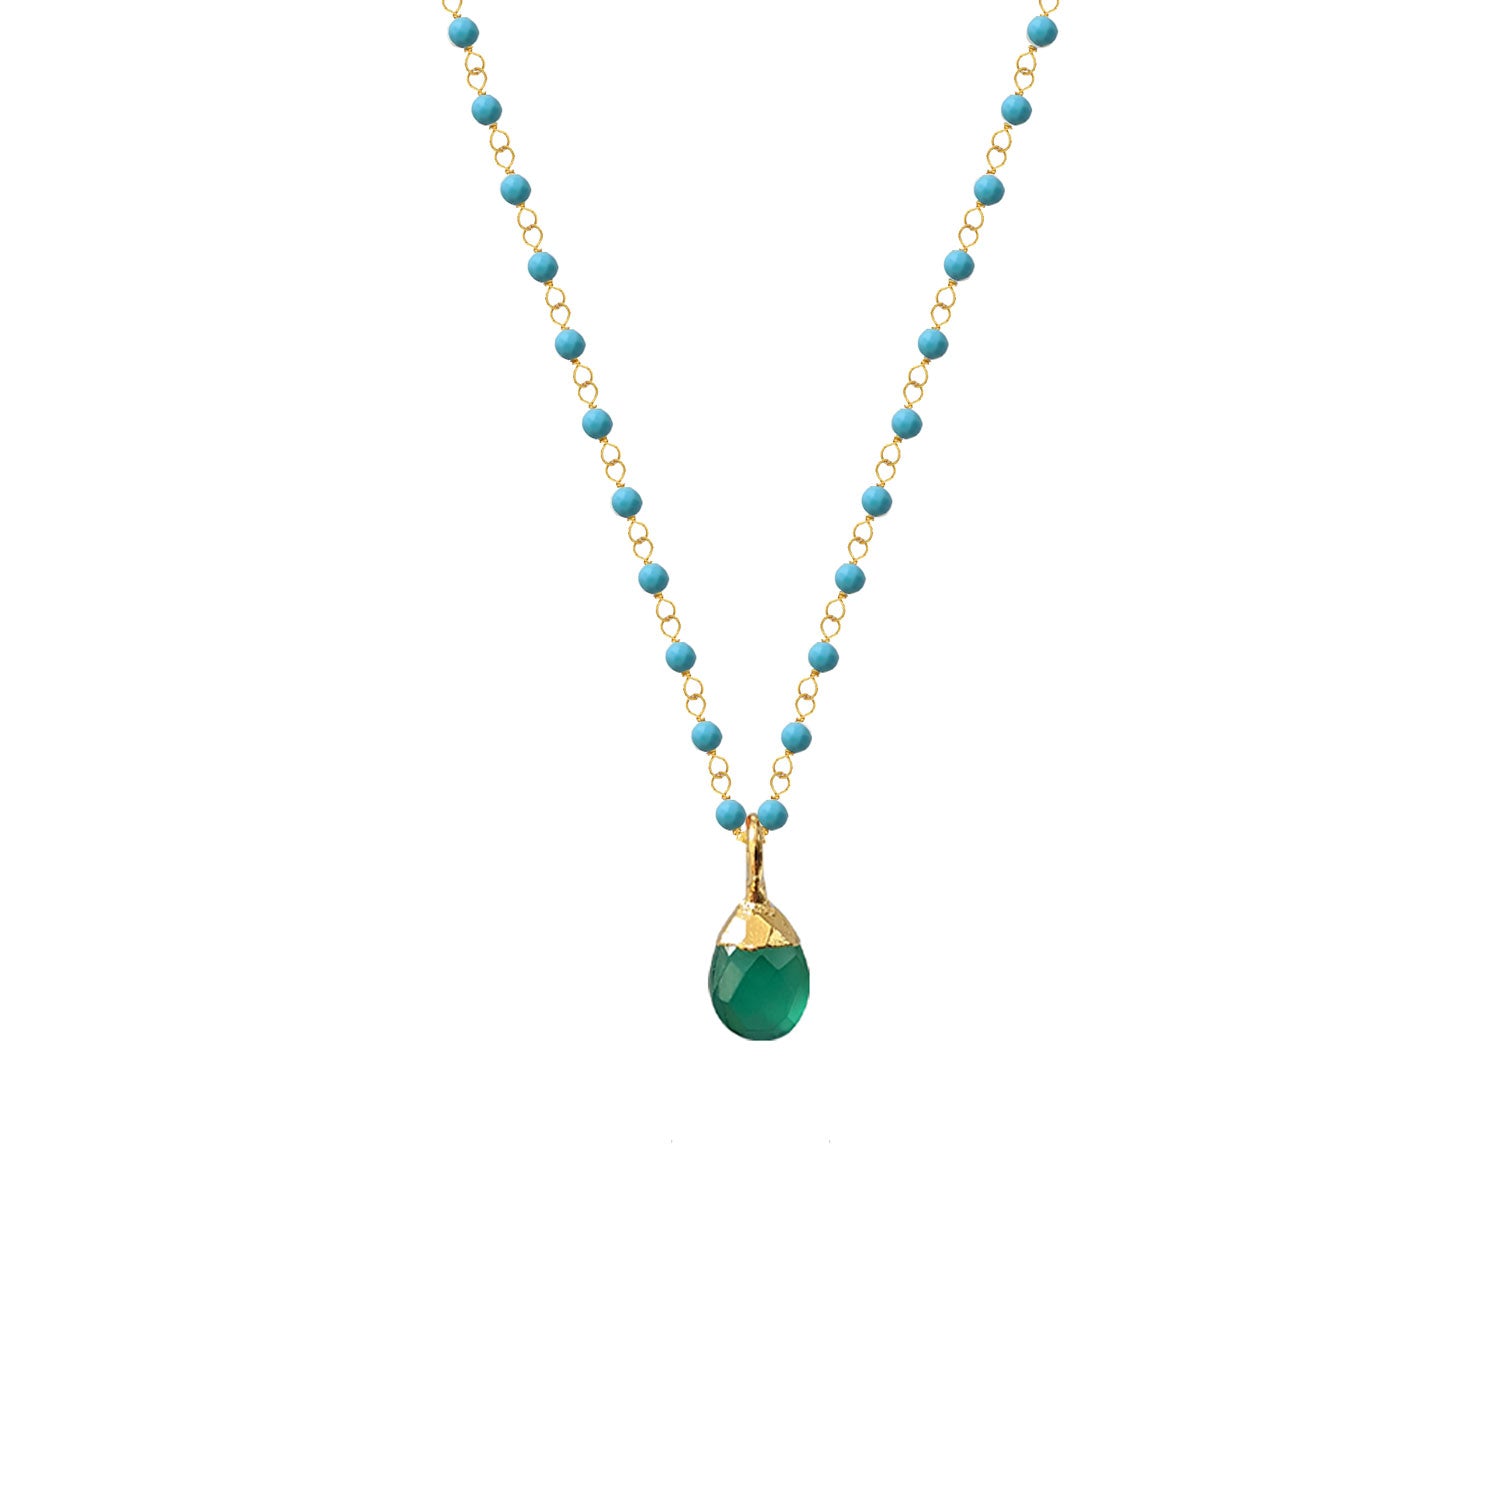 Howlite Turquoise rosary with Green Onyx Briolette